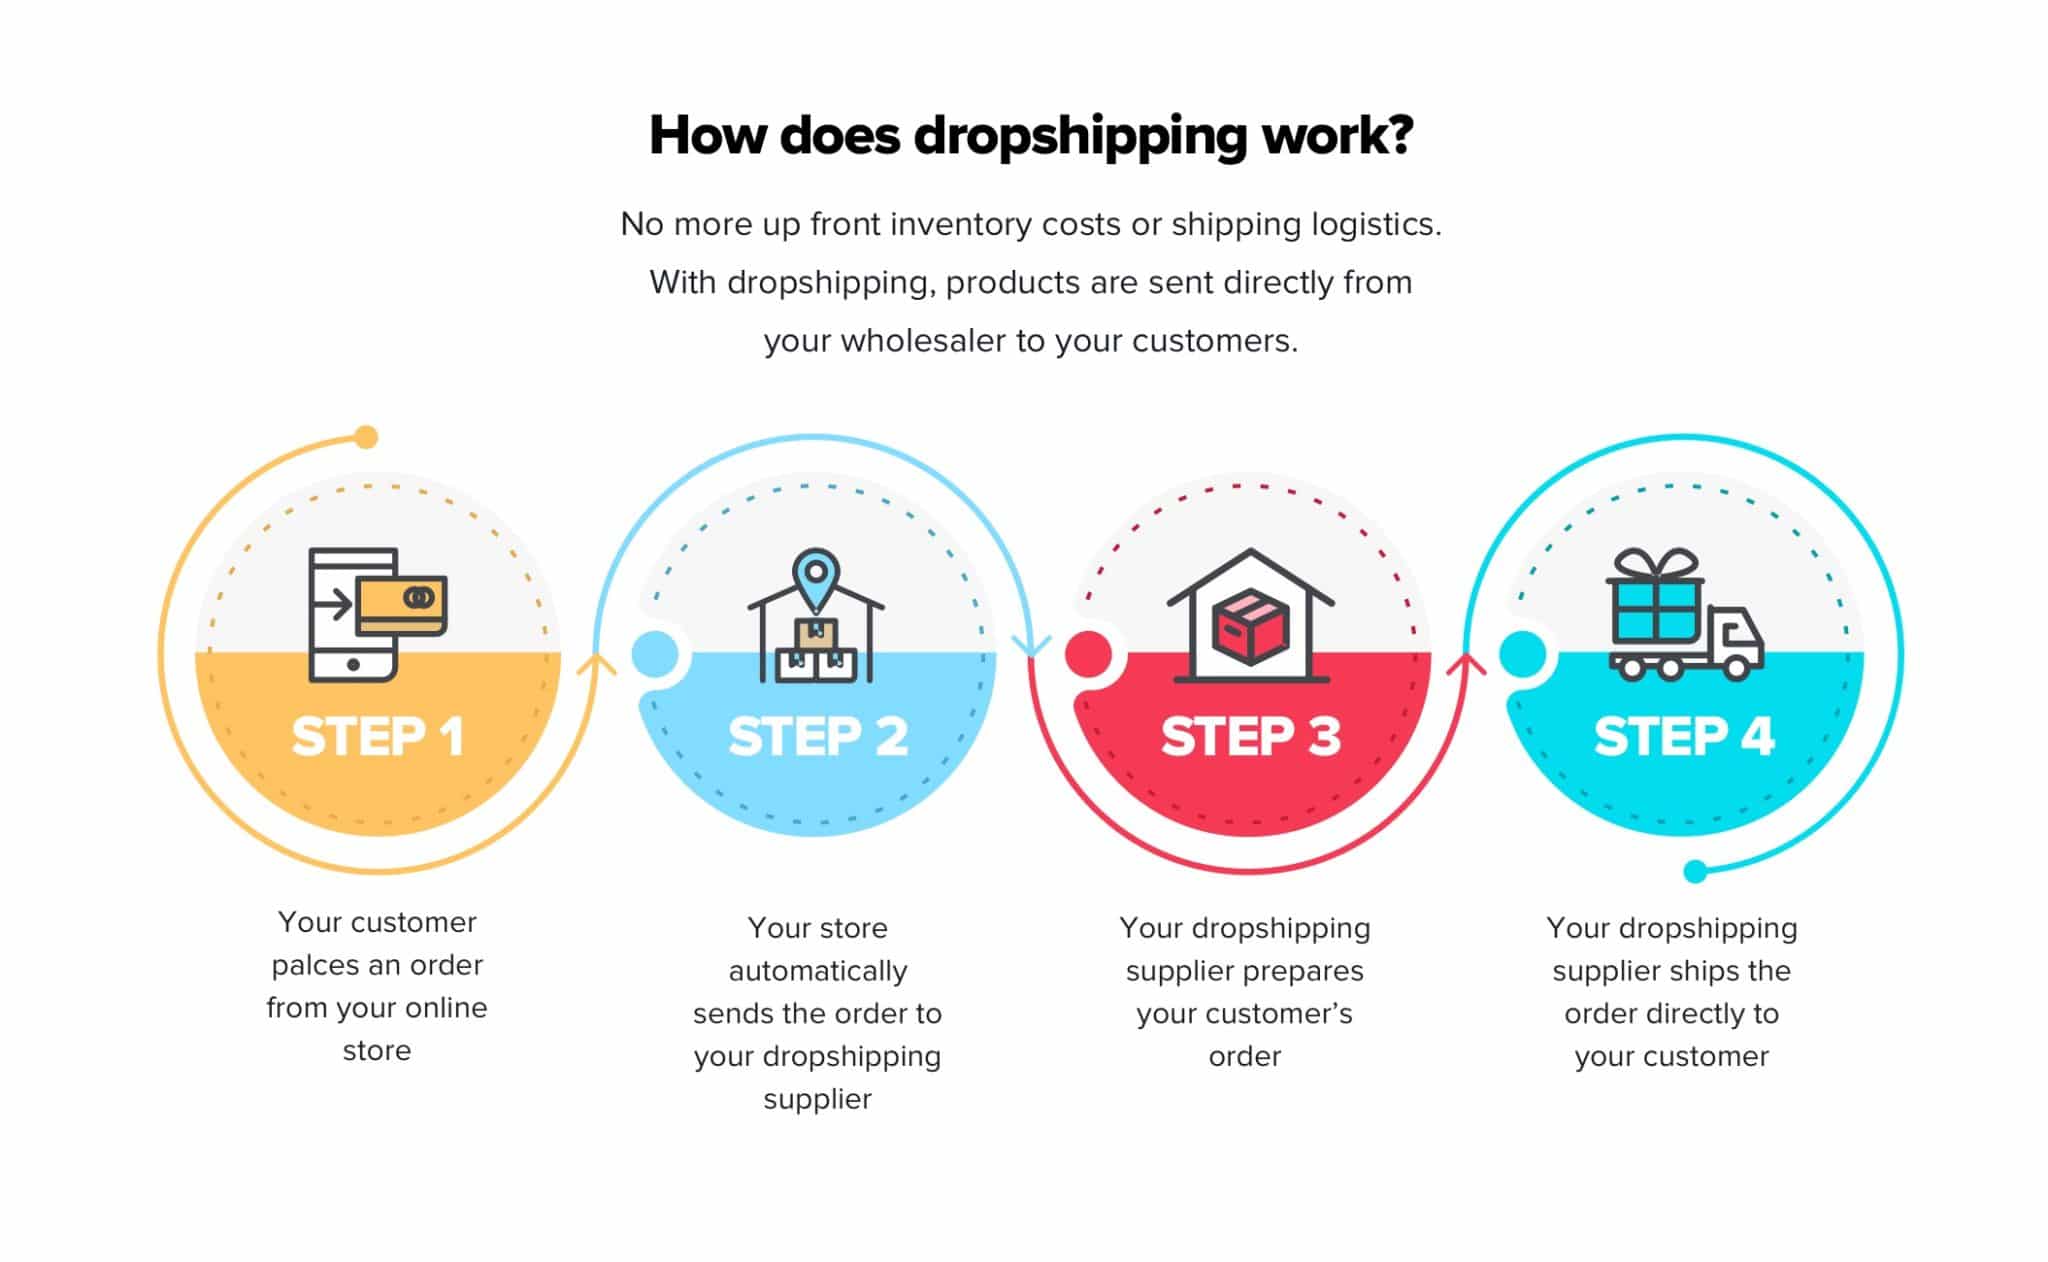 How Does Dropshipping Work